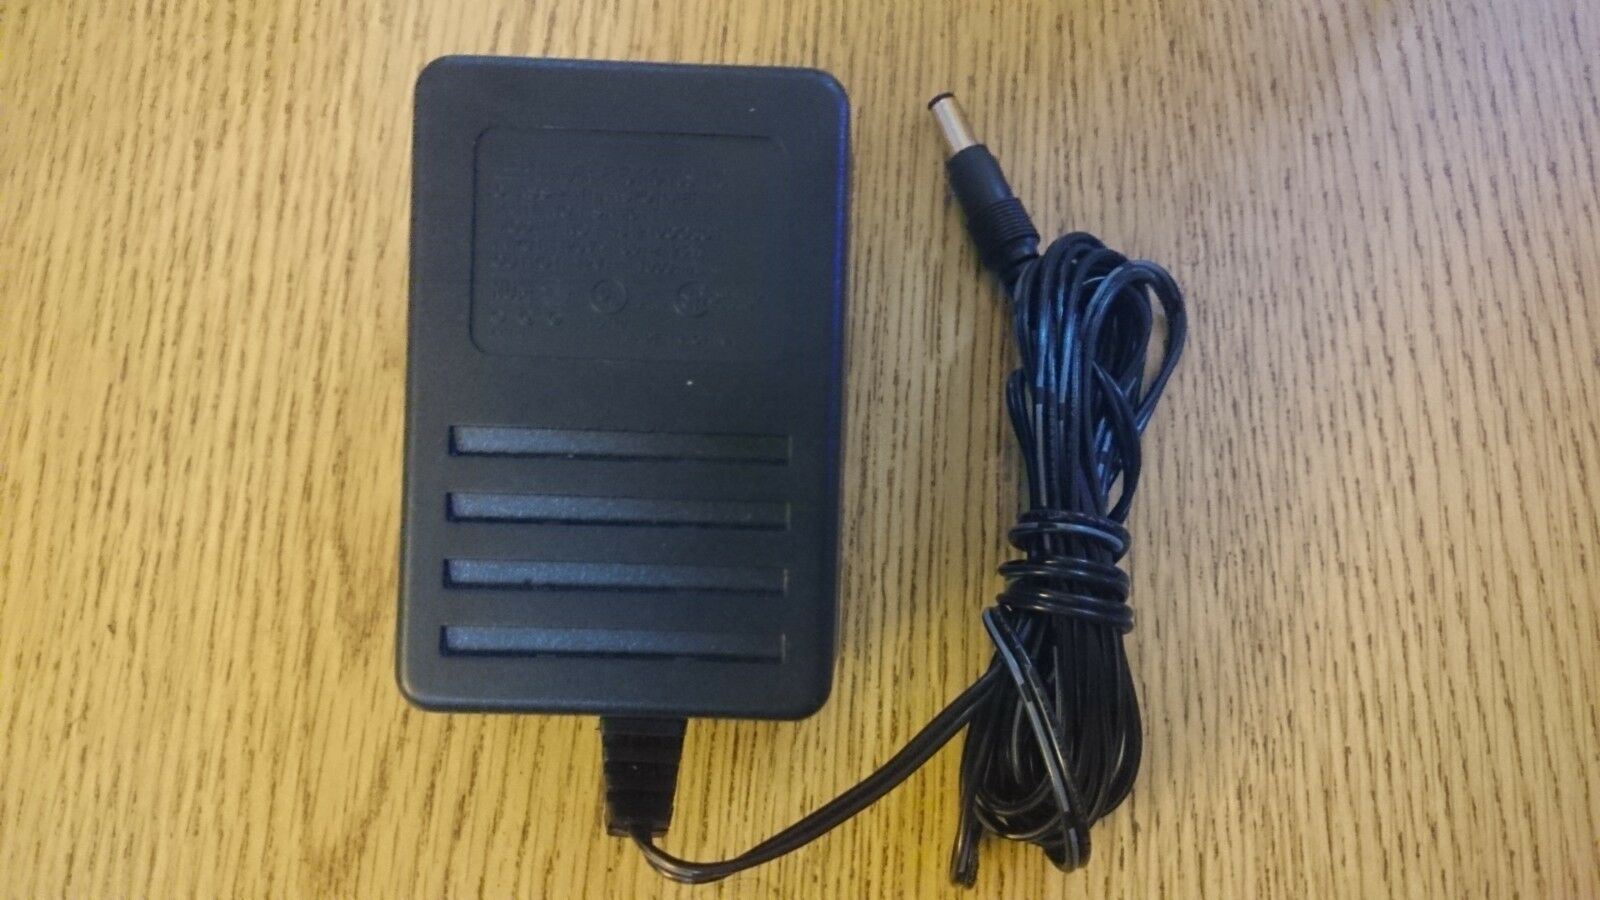 New 12V 1000mA LEI 481210OO3CT AC Power Supply Charger Adapter